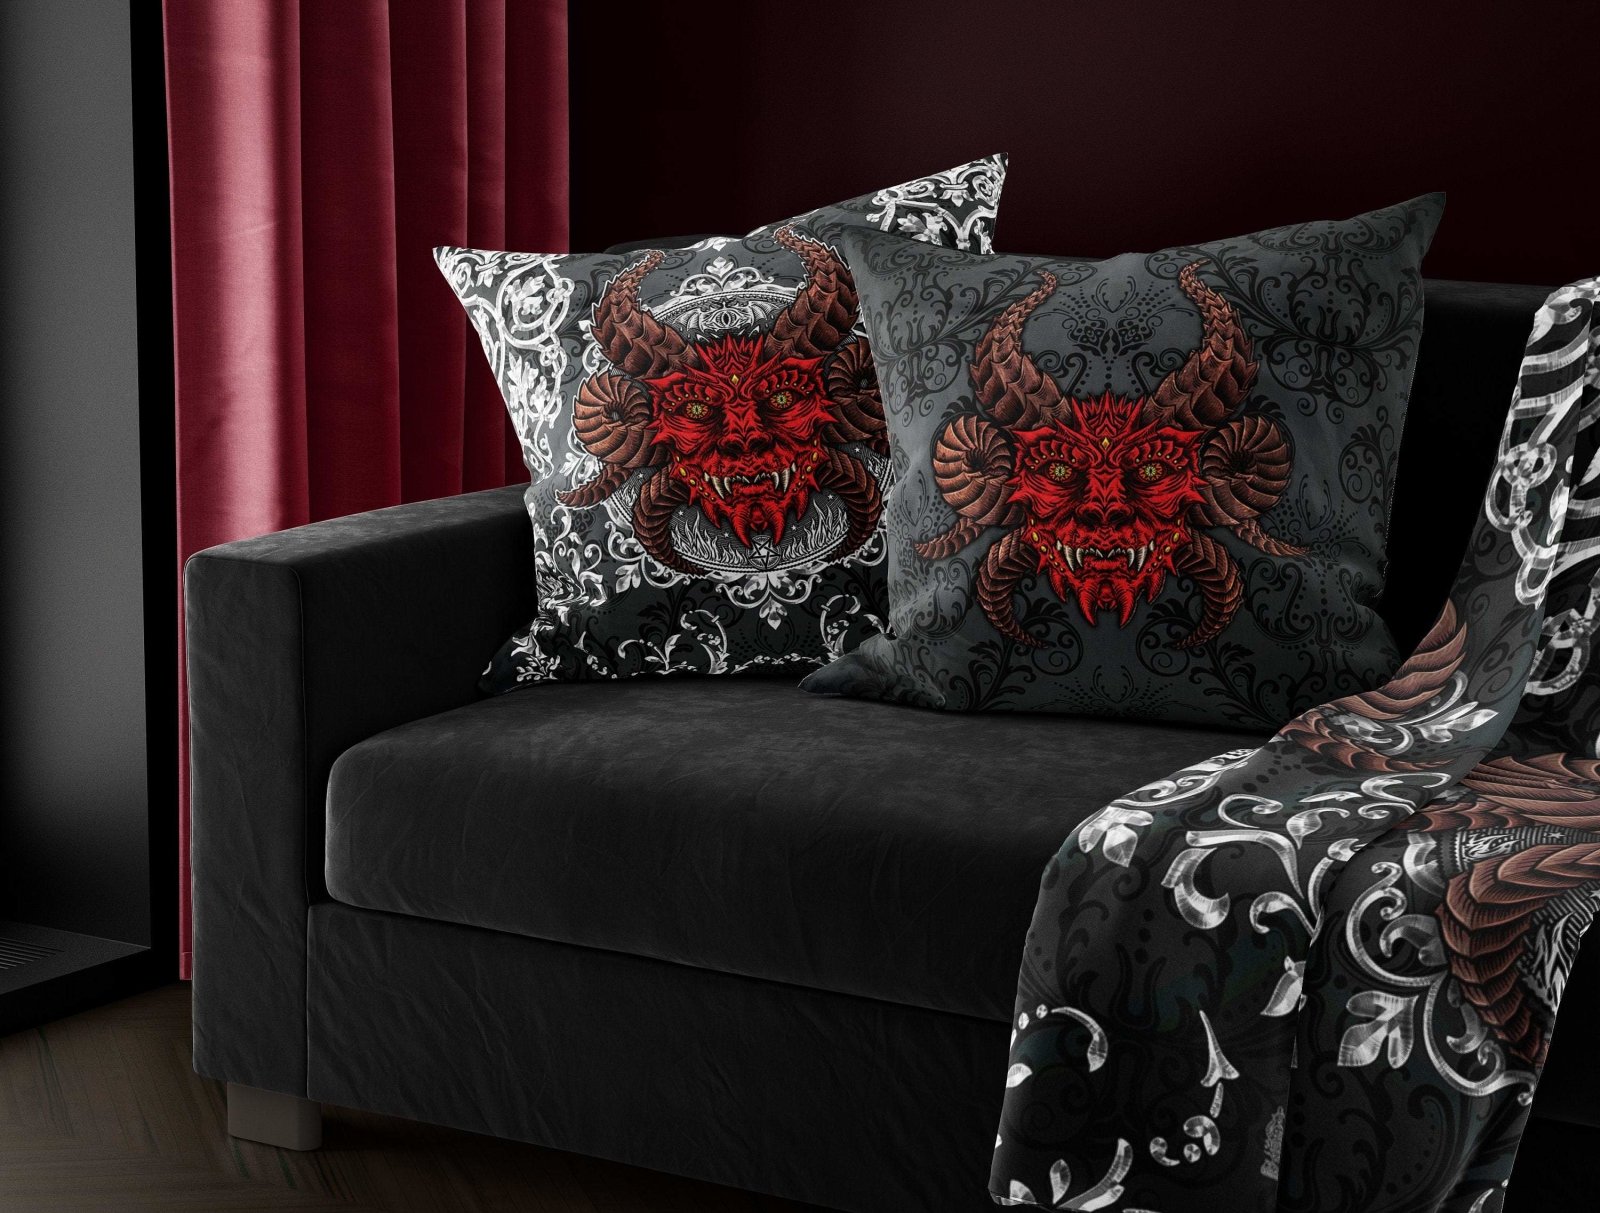 https://www.abysm-internal.com/cdn/shop/products/devil-throw-pillow-decorative-accent-pillow-square-cushion-cover-satanic-and-dark-room-decor-alternative-home-gothic-black-abysm-internal-424083.jpg?v=1689634318&width=1600